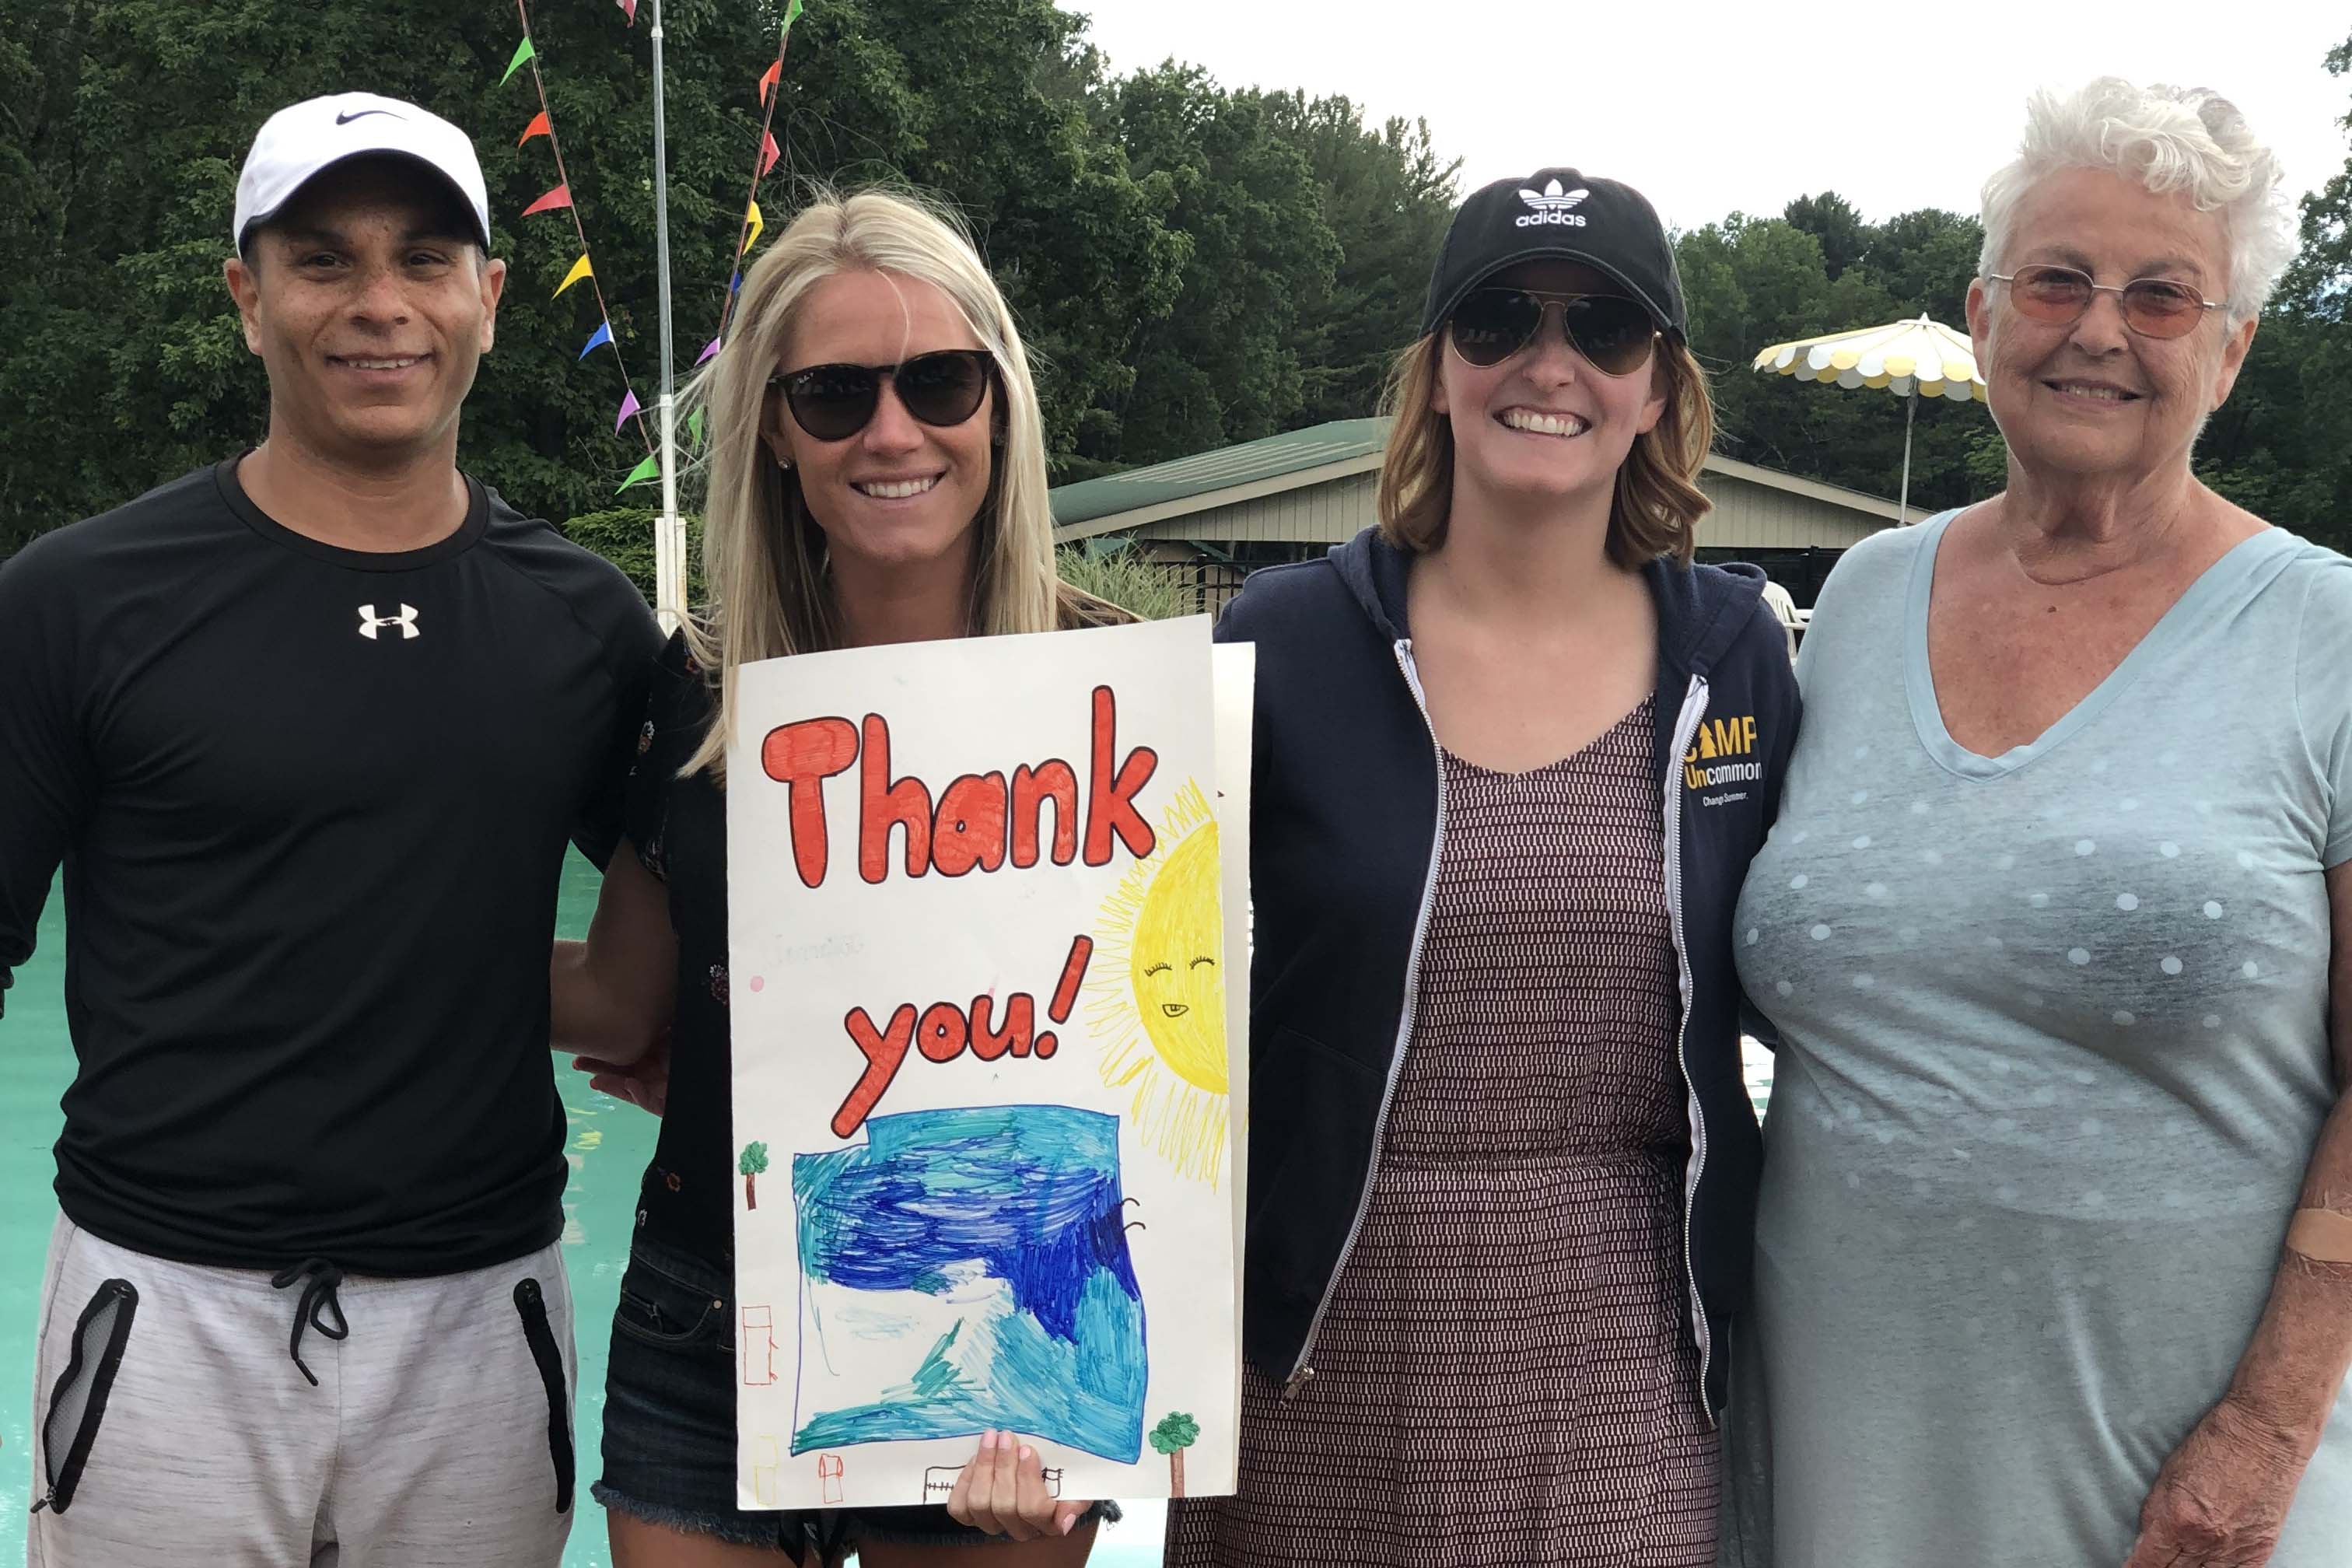 PE staff pose with resort owner and poster that says "thank you"